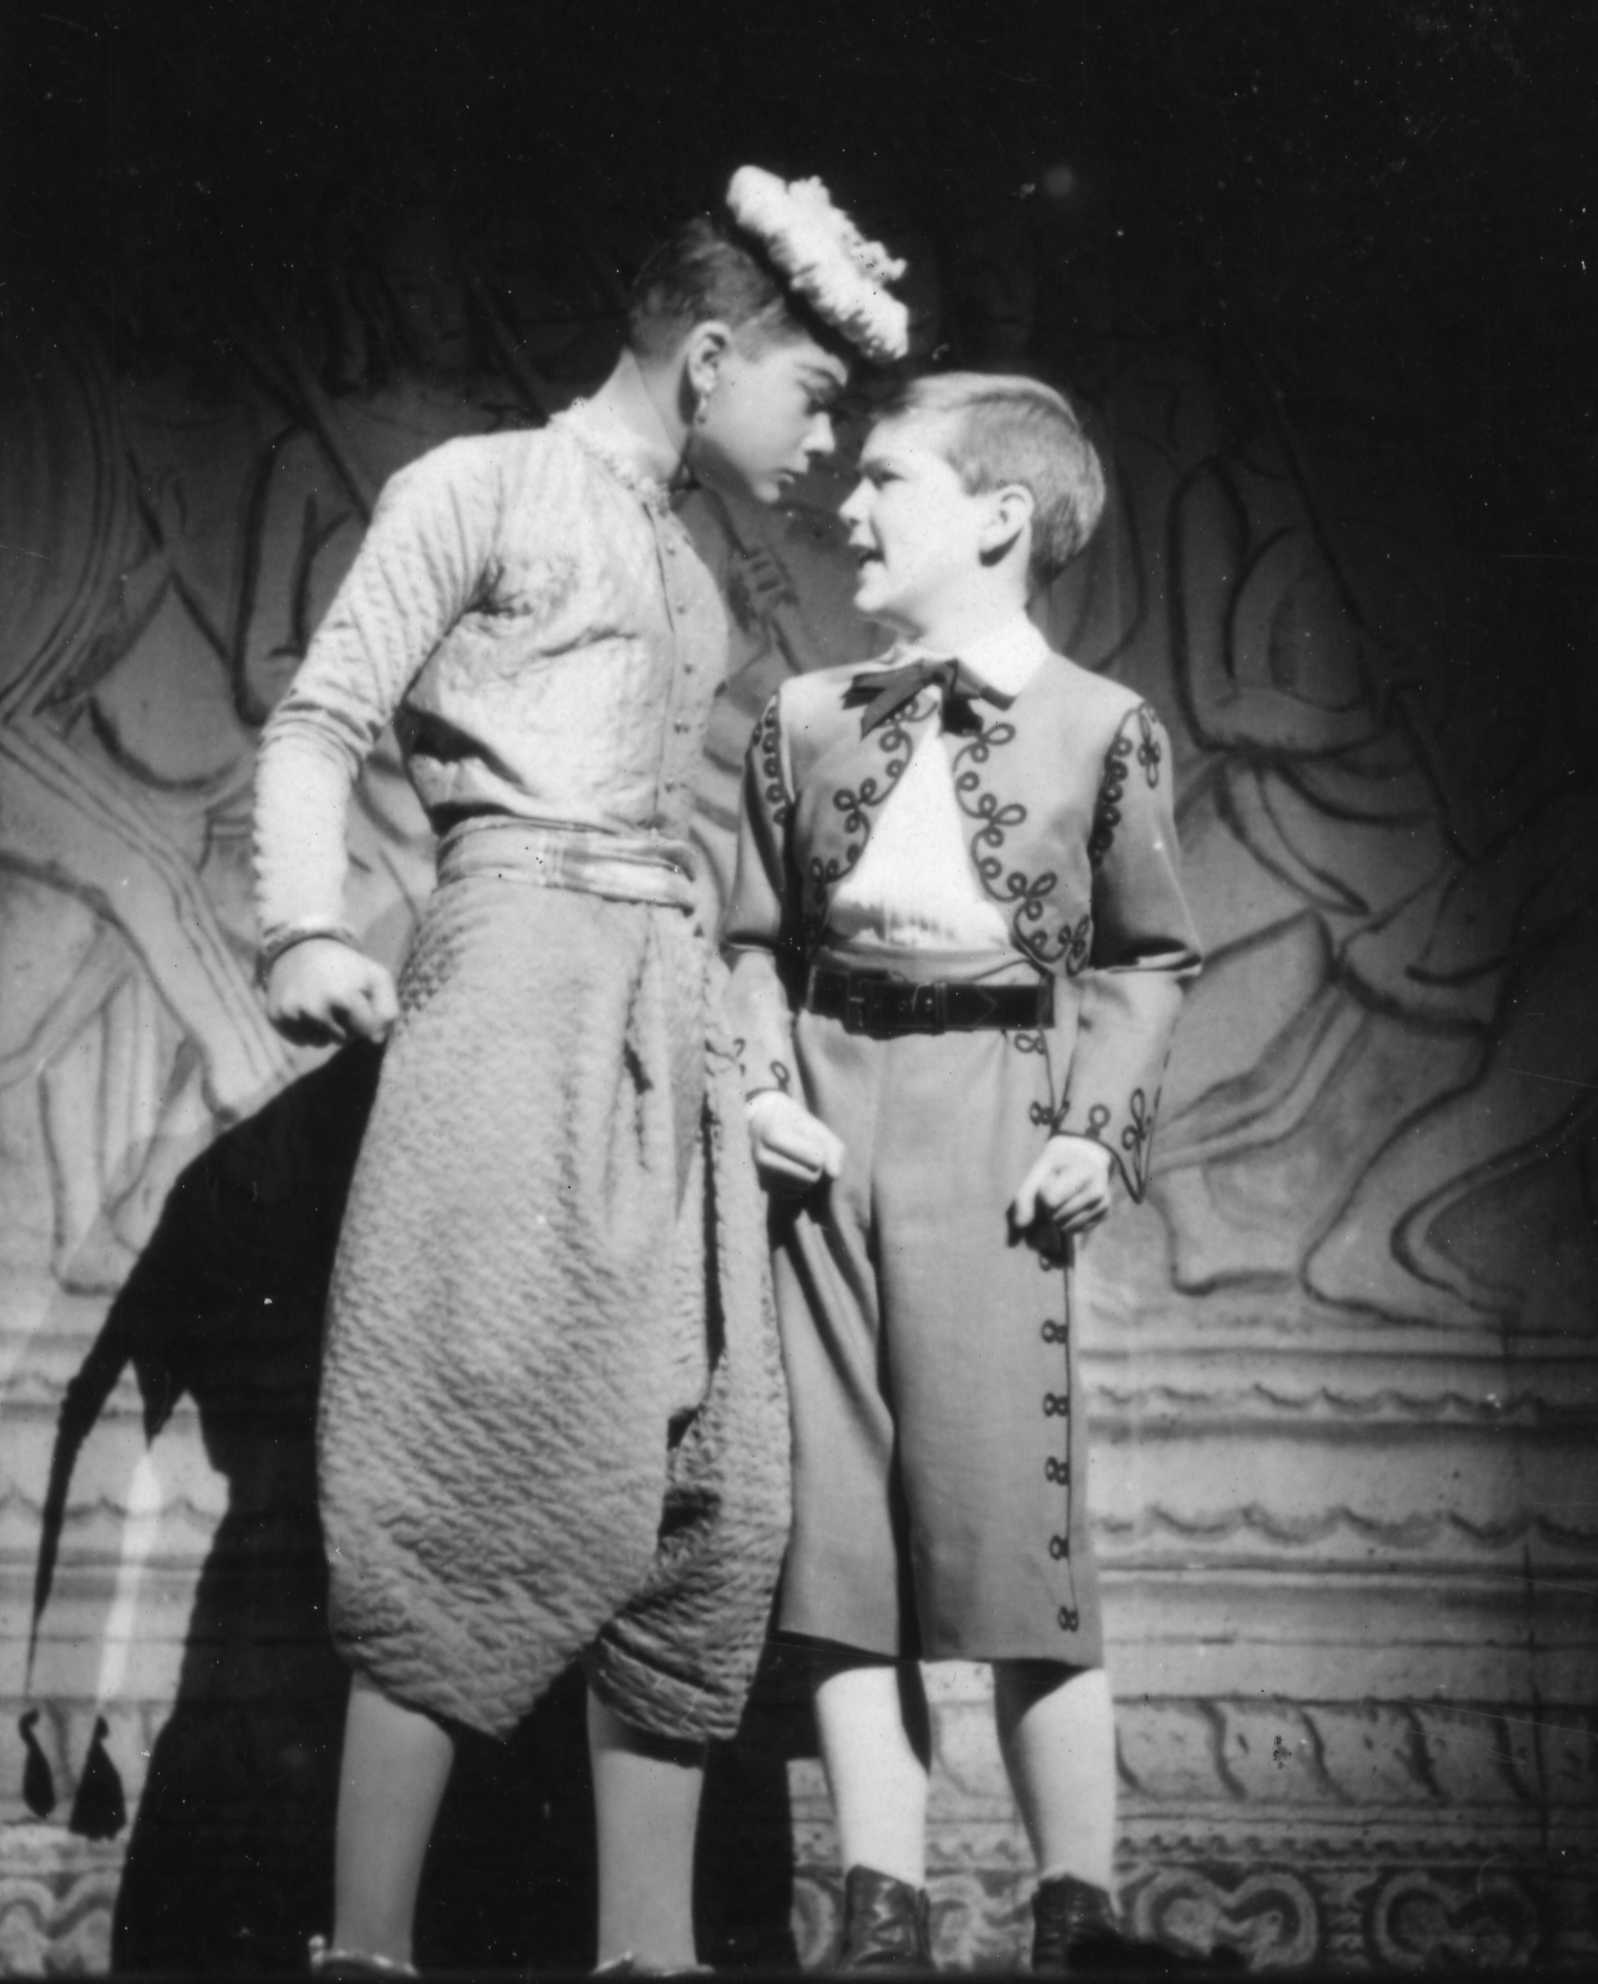 A photo from the 1951 Broadway production of The King and I.